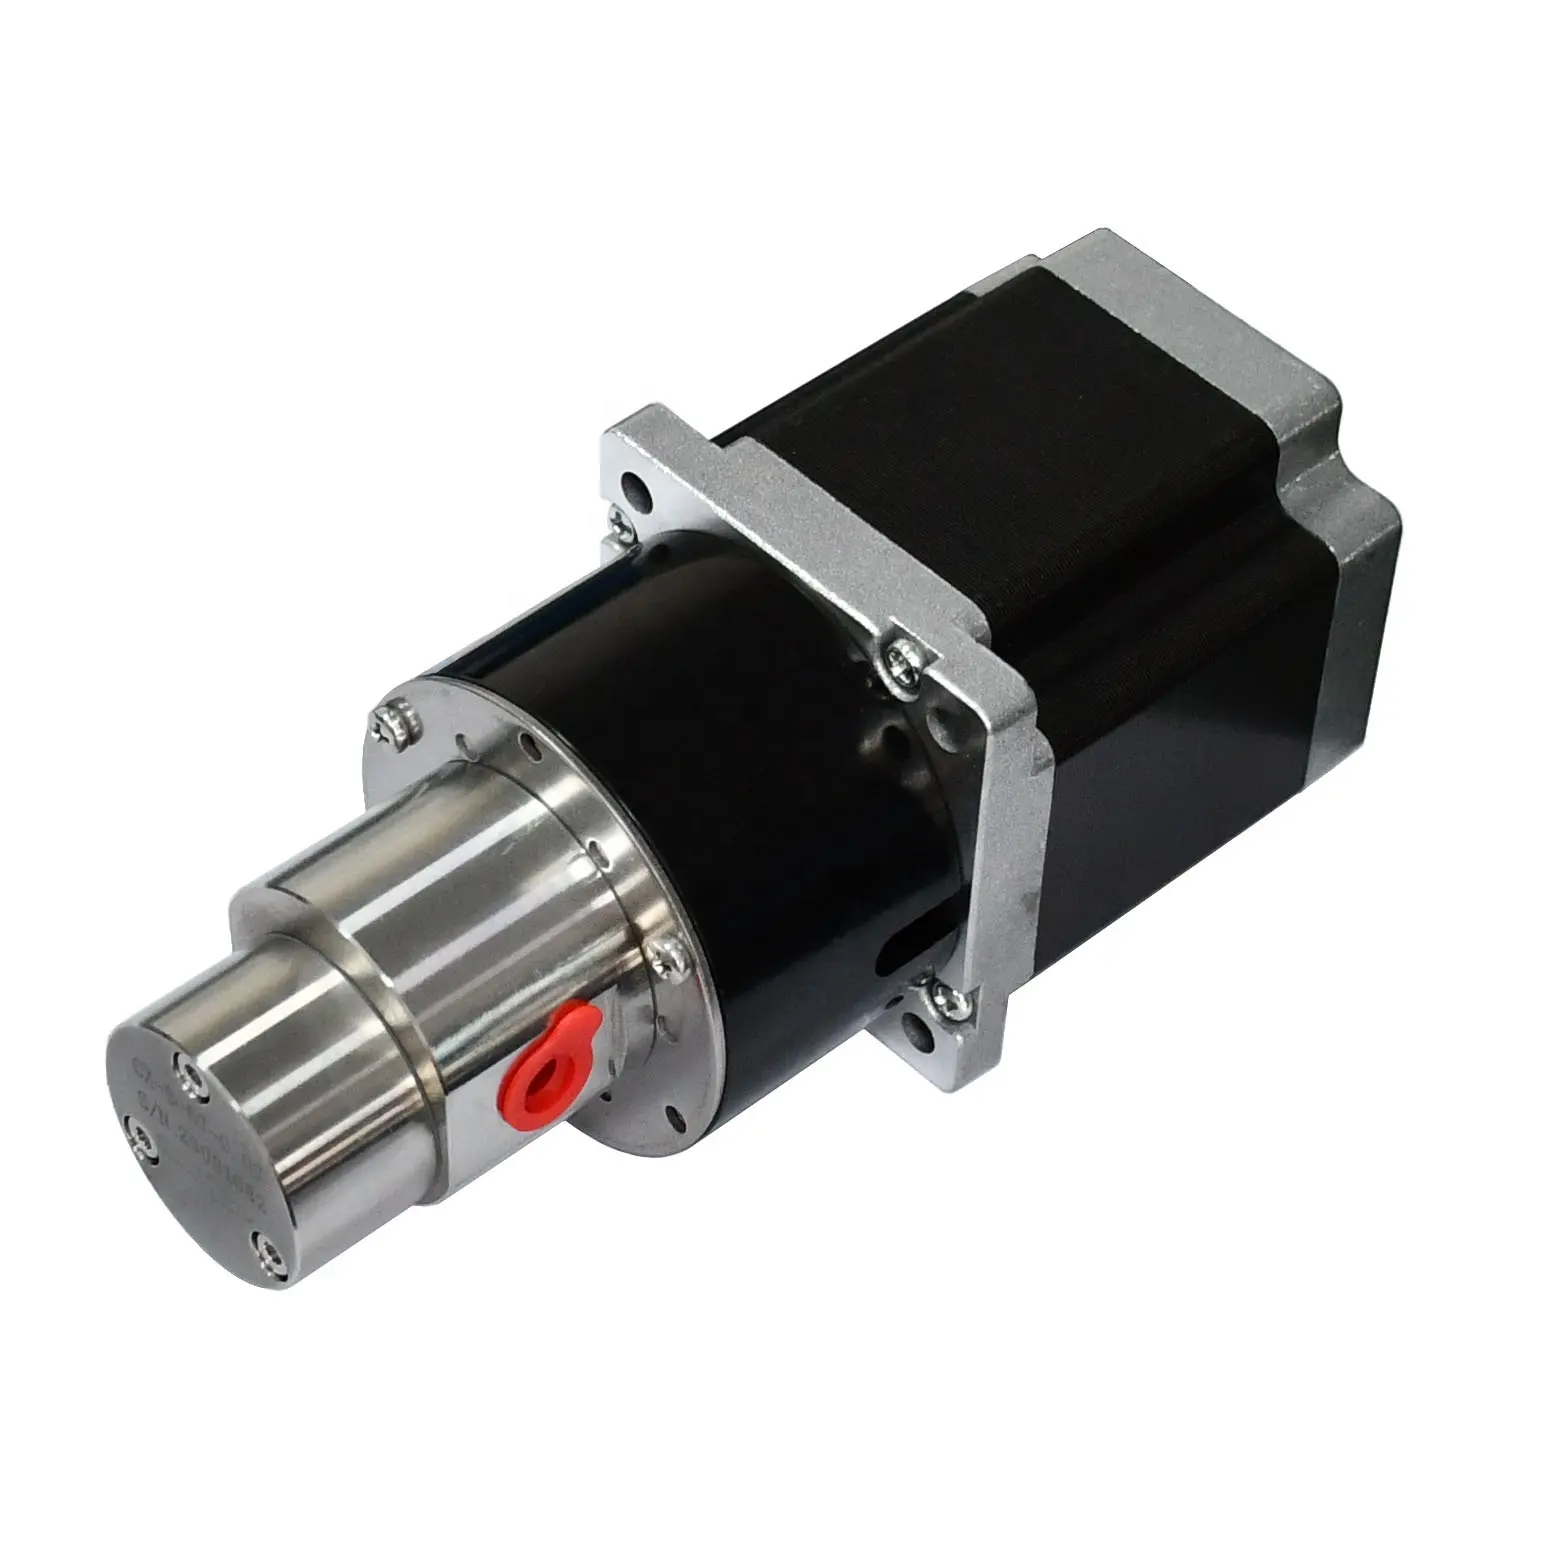 0.07 ml/rev Stainless Steel Micro Magnetic Drive medizin lieferung Gear Pump M 0.07 S57HS60